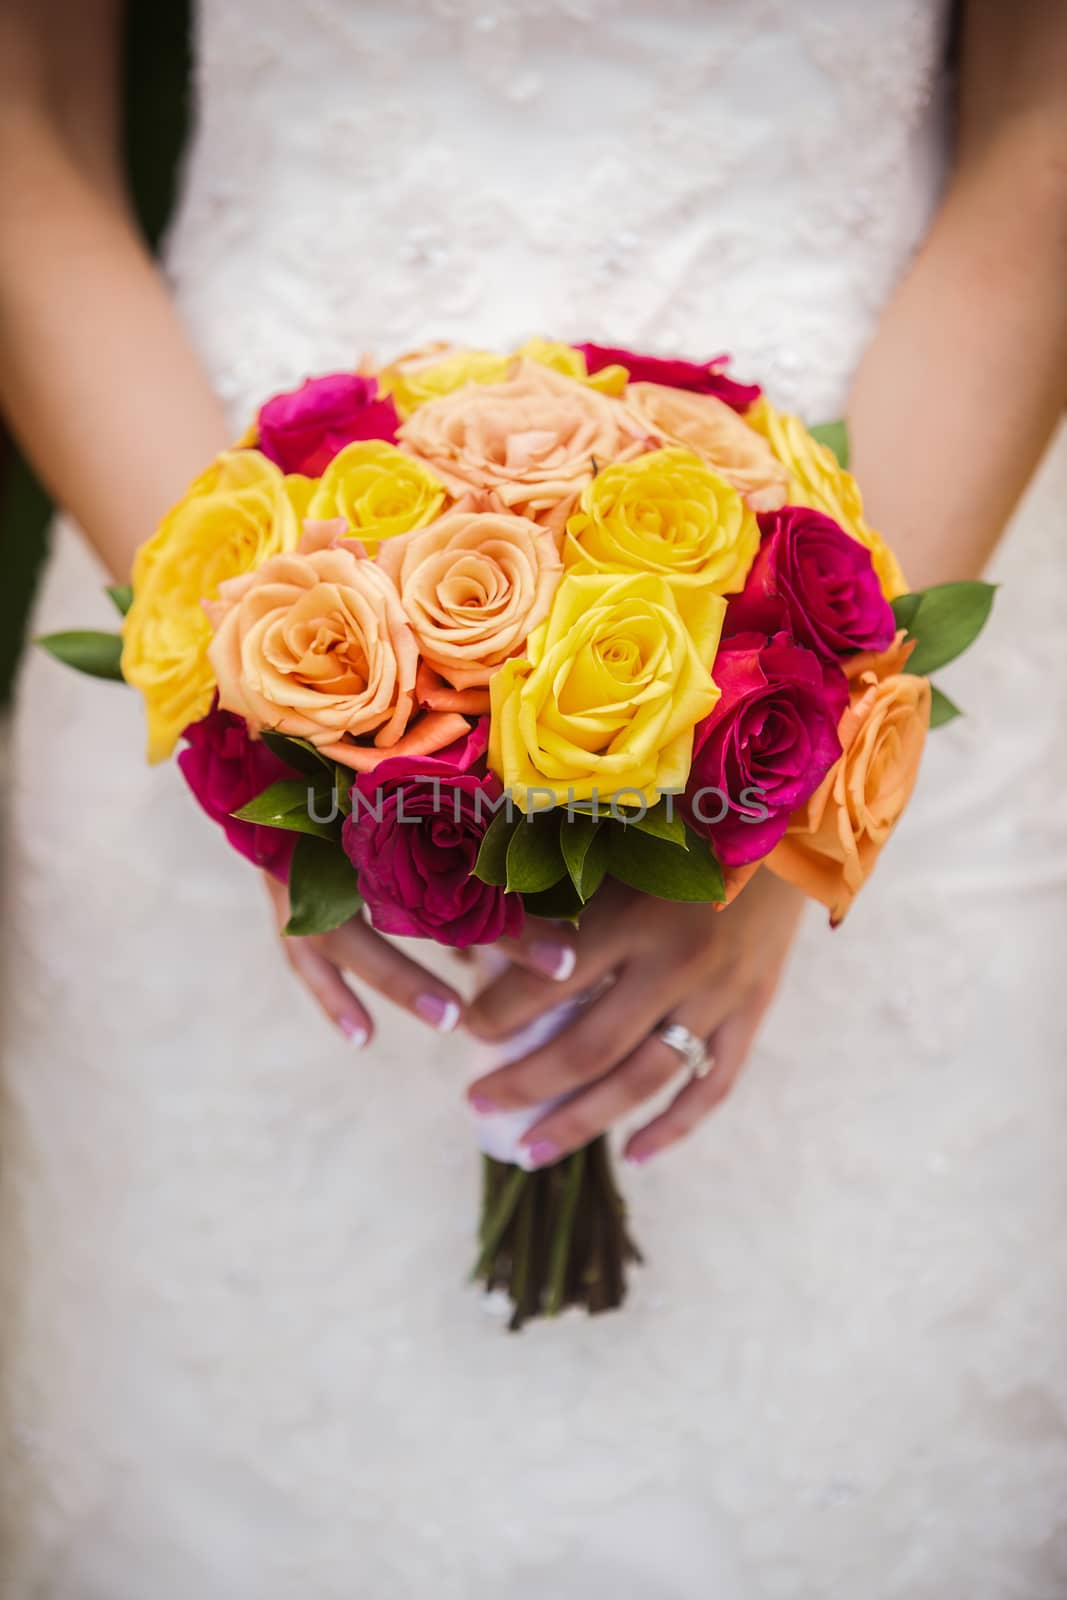 Beautiful bride and groom holding red, yellow, orange bouquet.